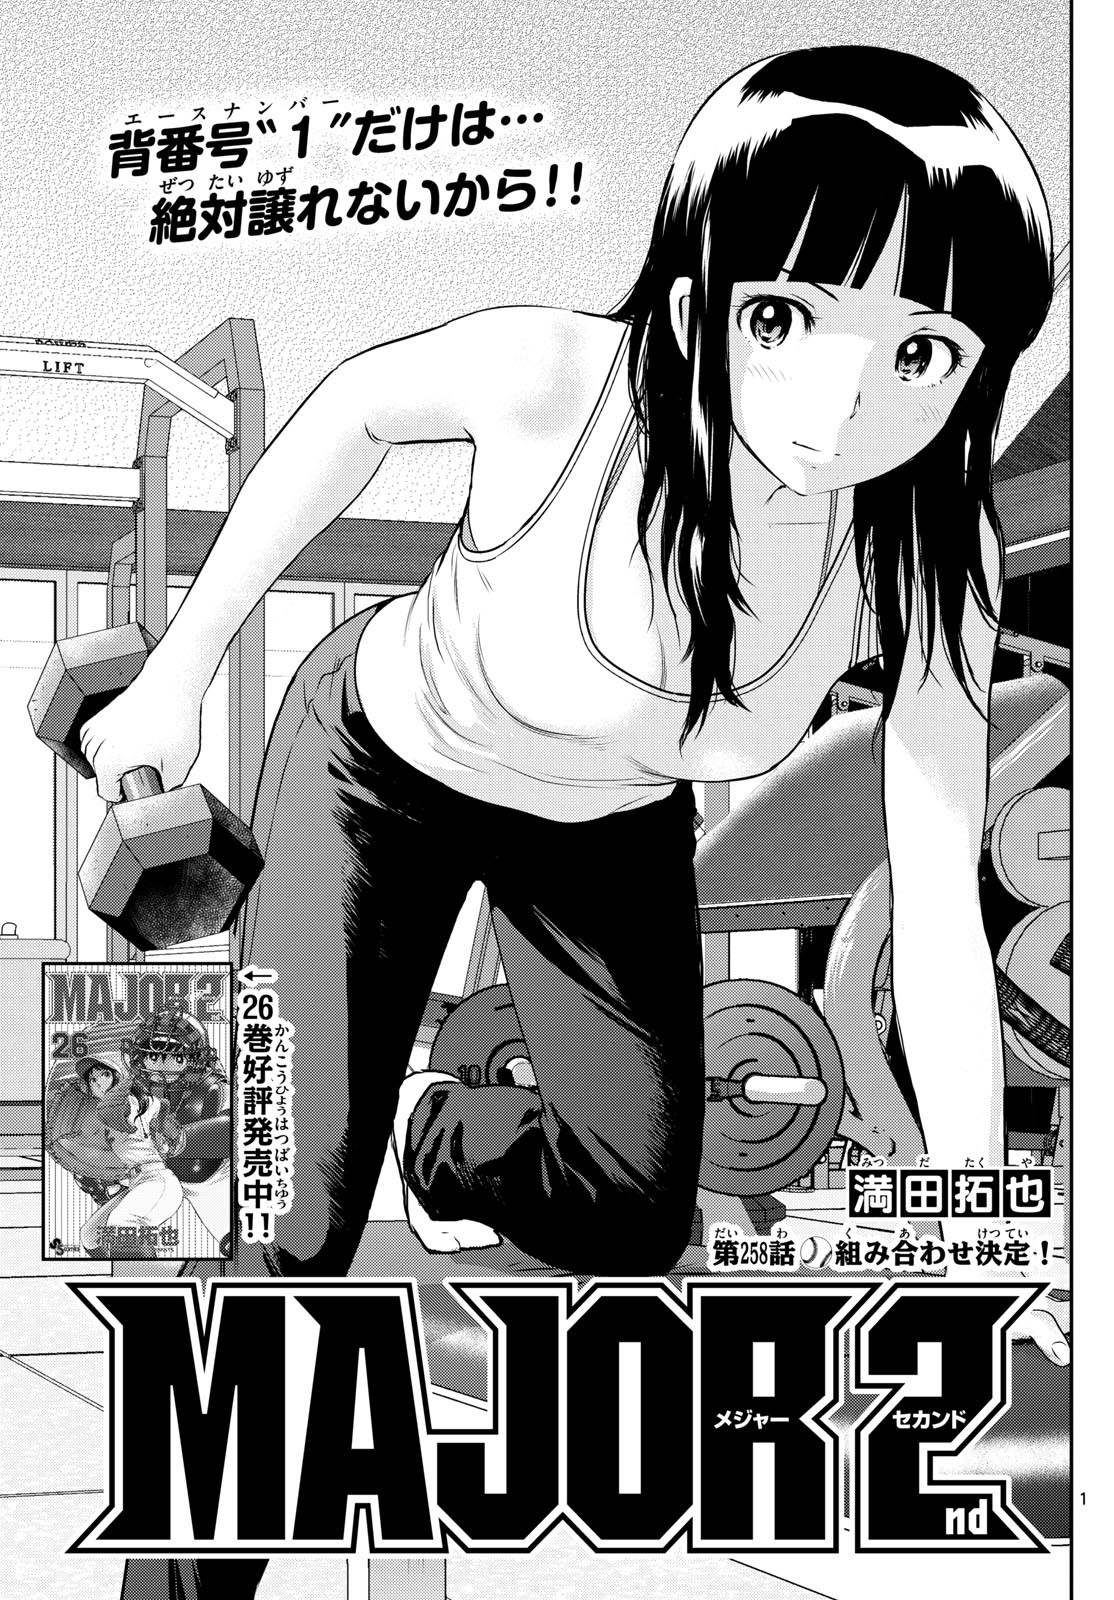 Major 2nd - メジャーセカンド - Chapter 258 - Page 1